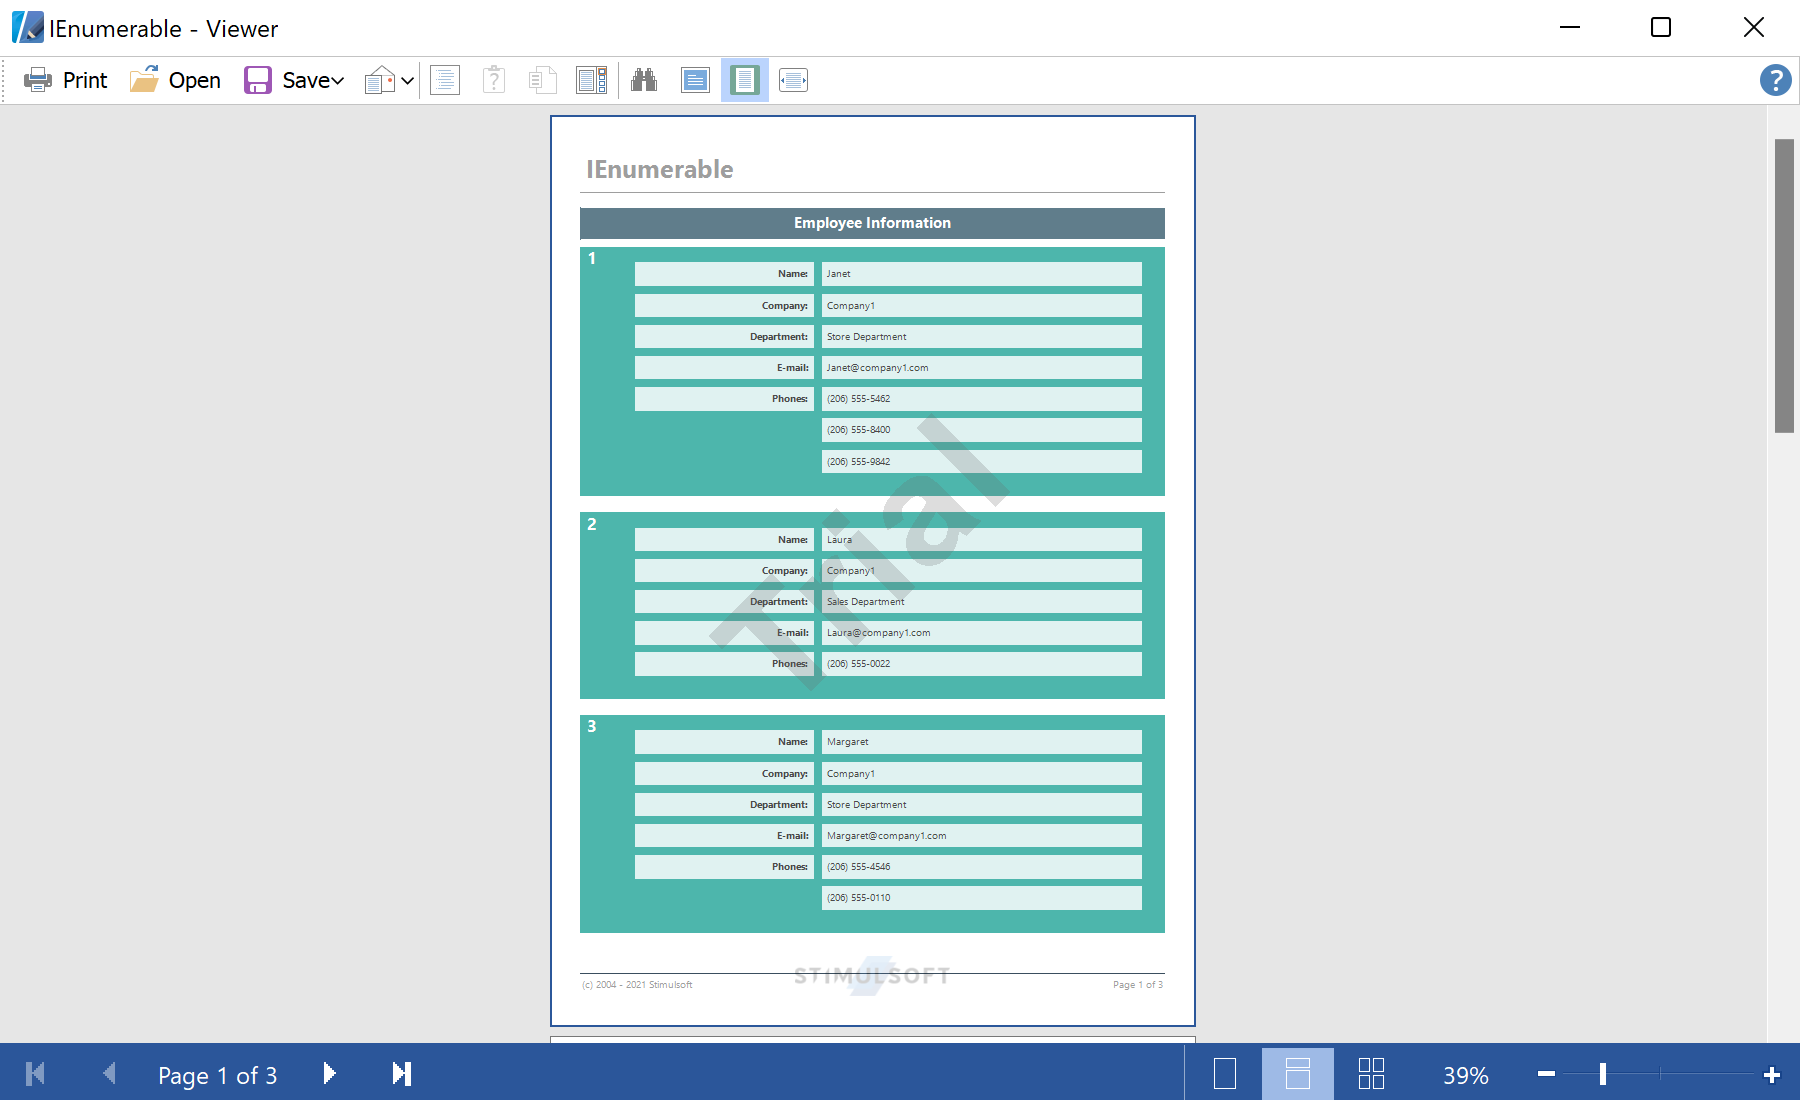 Using Business Objects in the Report